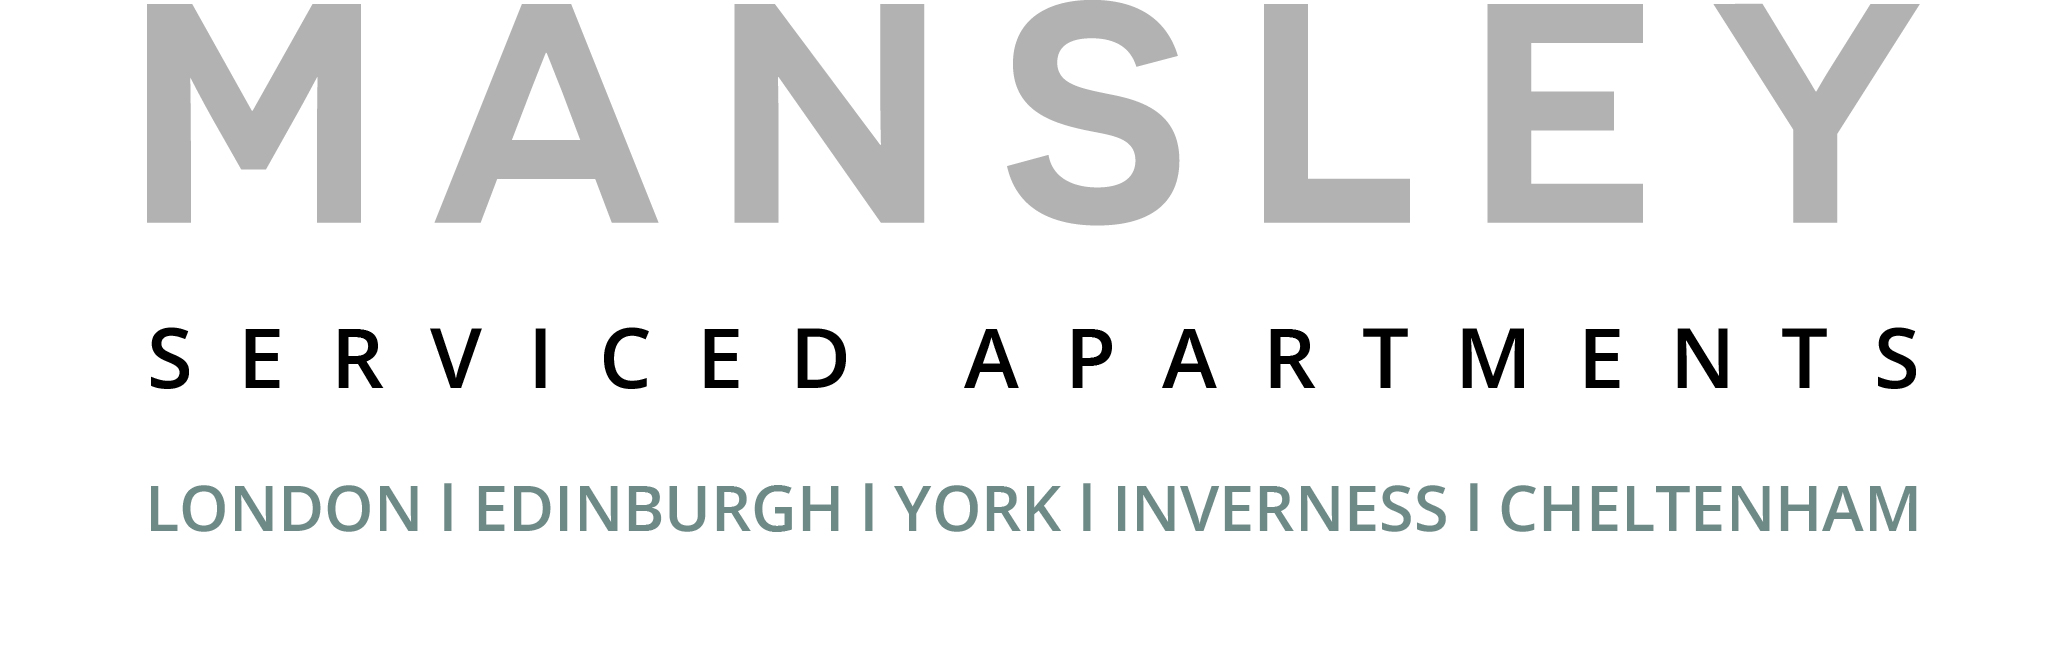 logo for Mansley Serviced Apartments